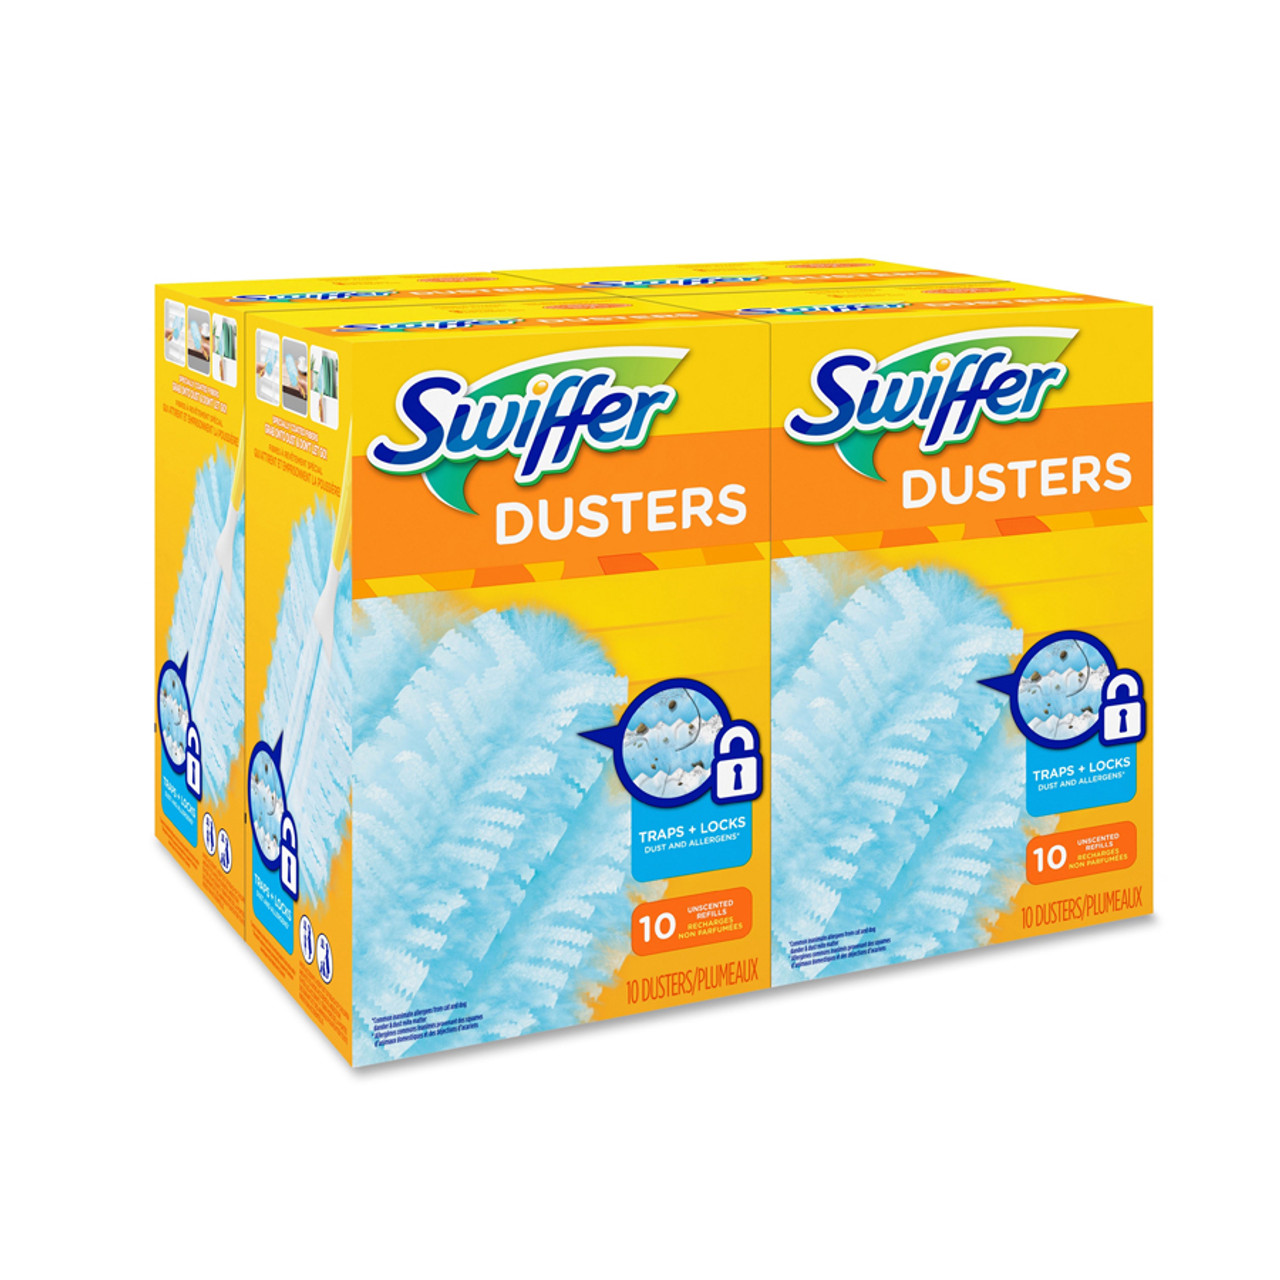 Swiffer Dusters Dusting Kit Unscented